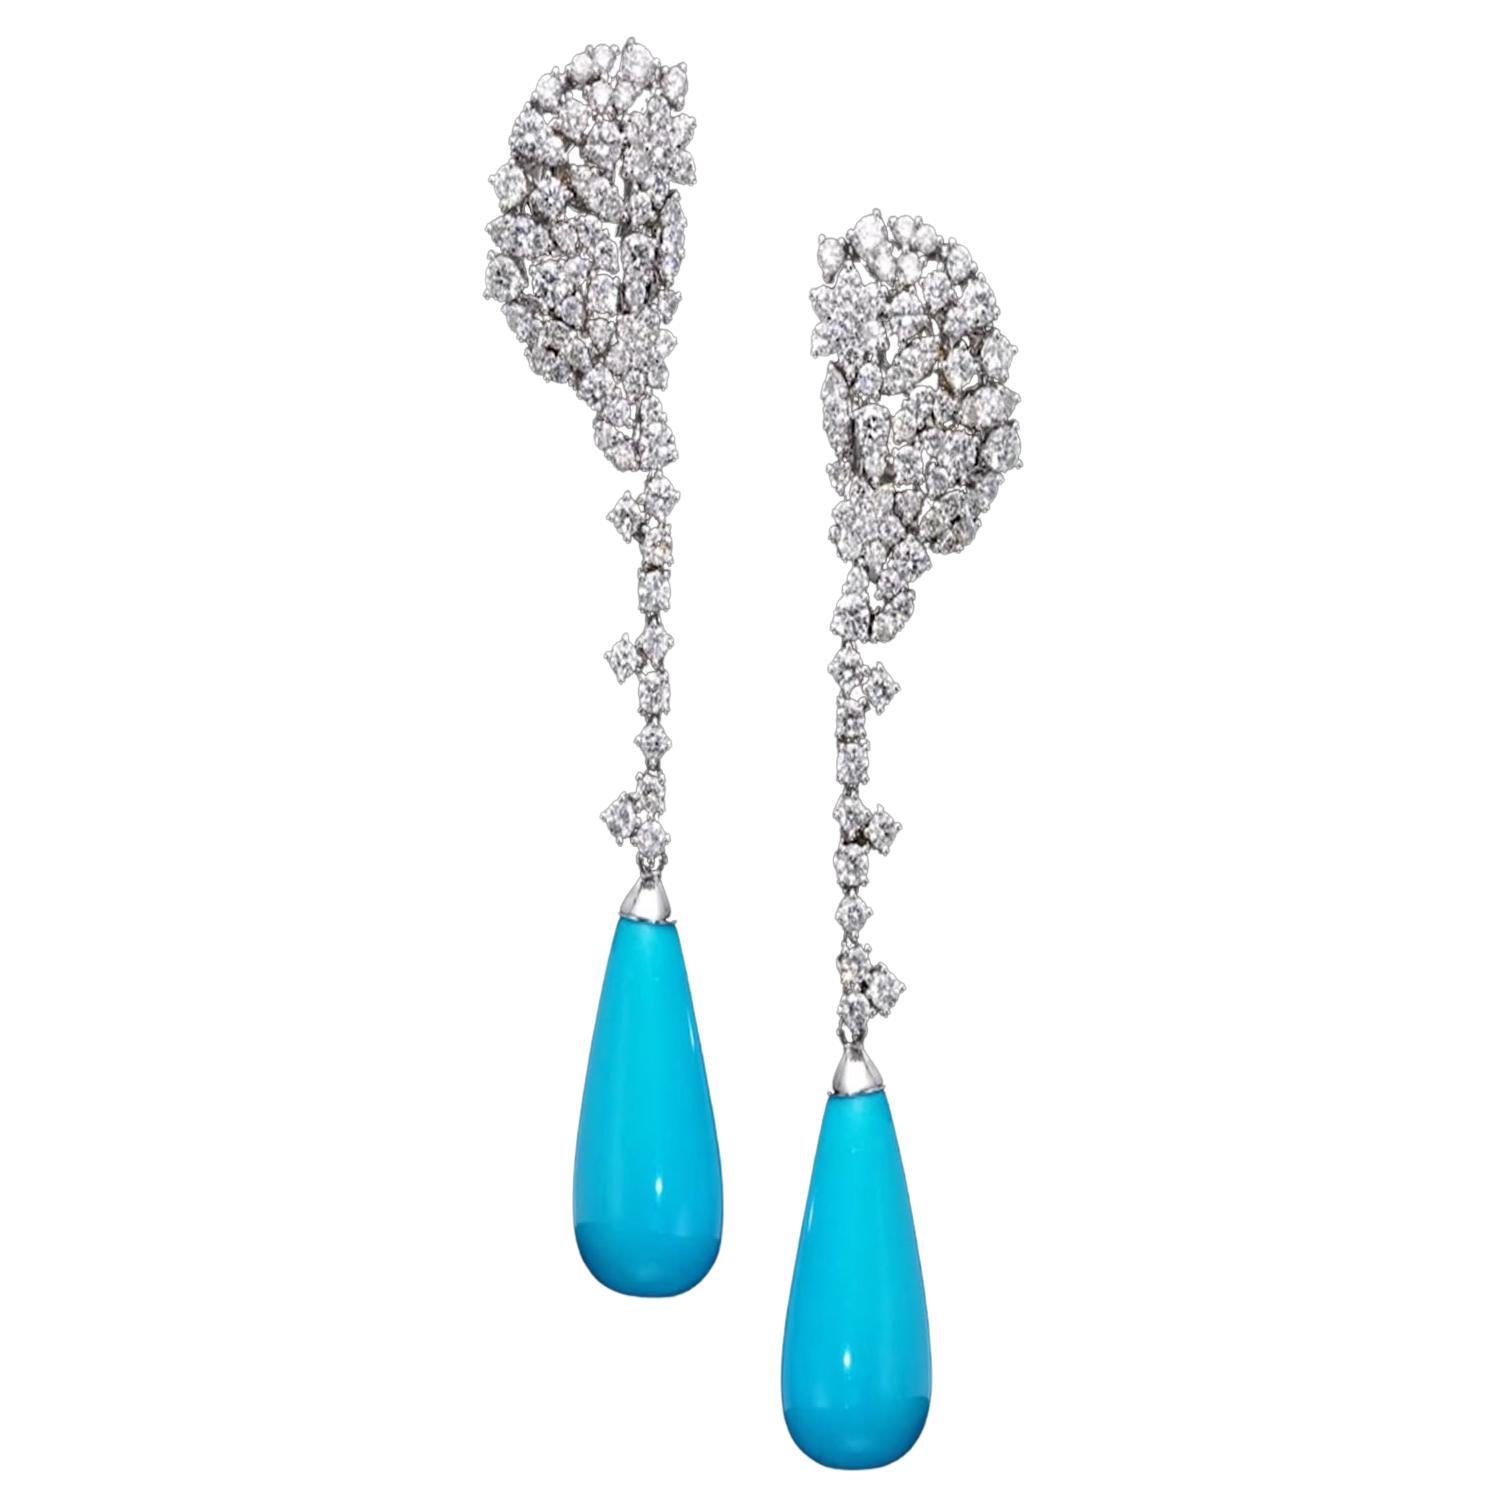 8.20 carat Turquoise Drop Earrings with 4.36 carat Natural Diamonds For Sale